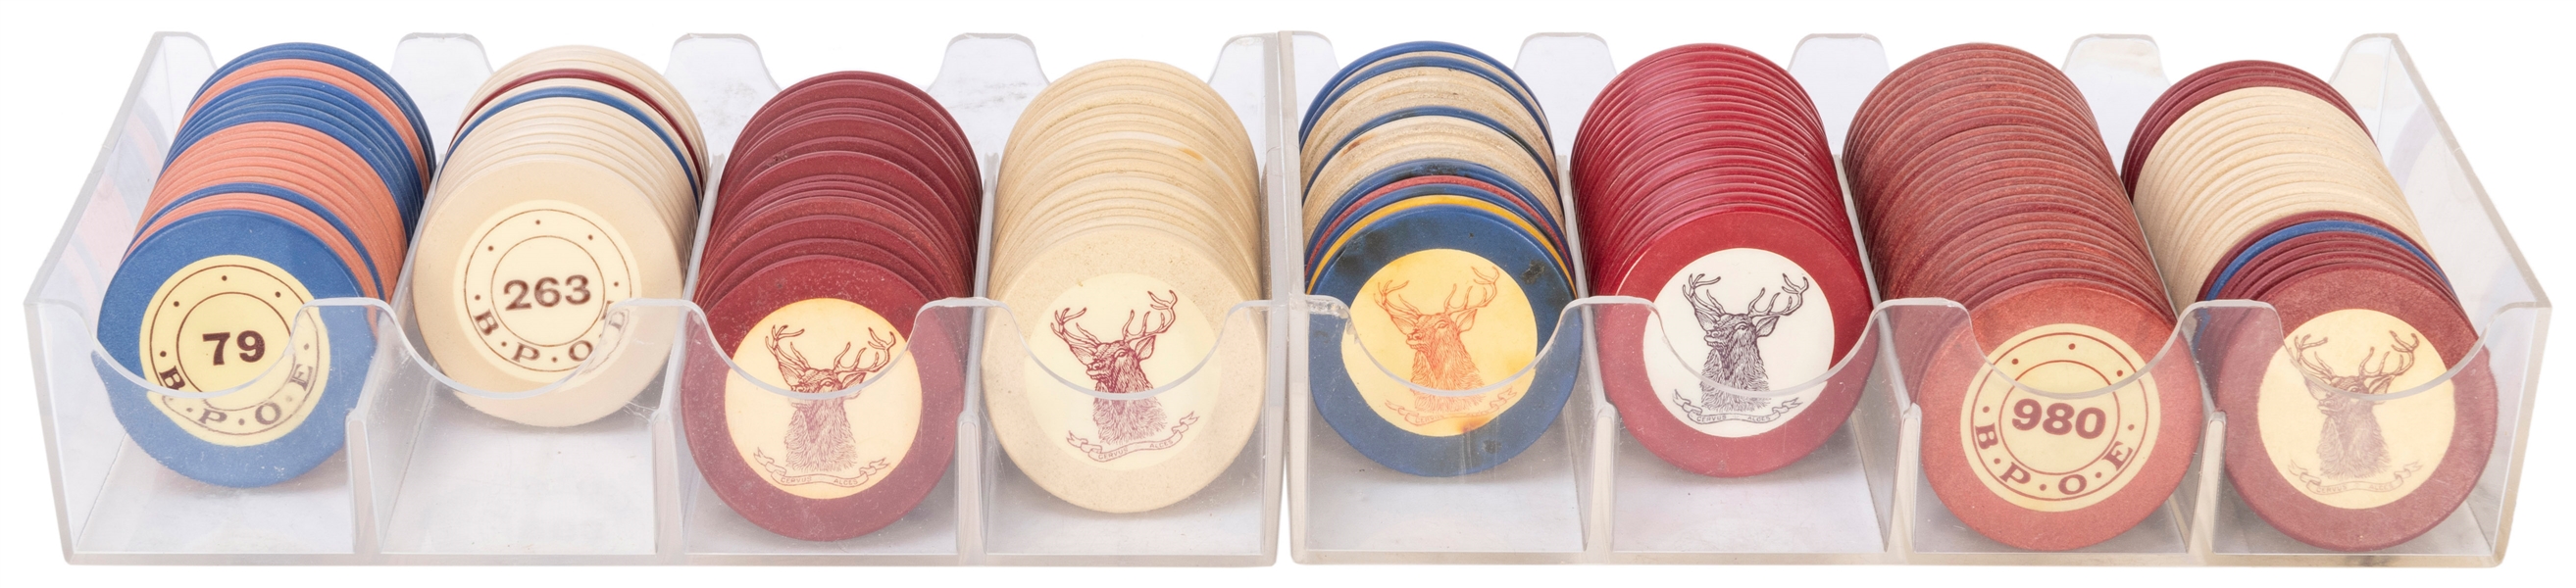  BPOE (Elks) Crest & Seal Chip Collection. Over 150 chips to...